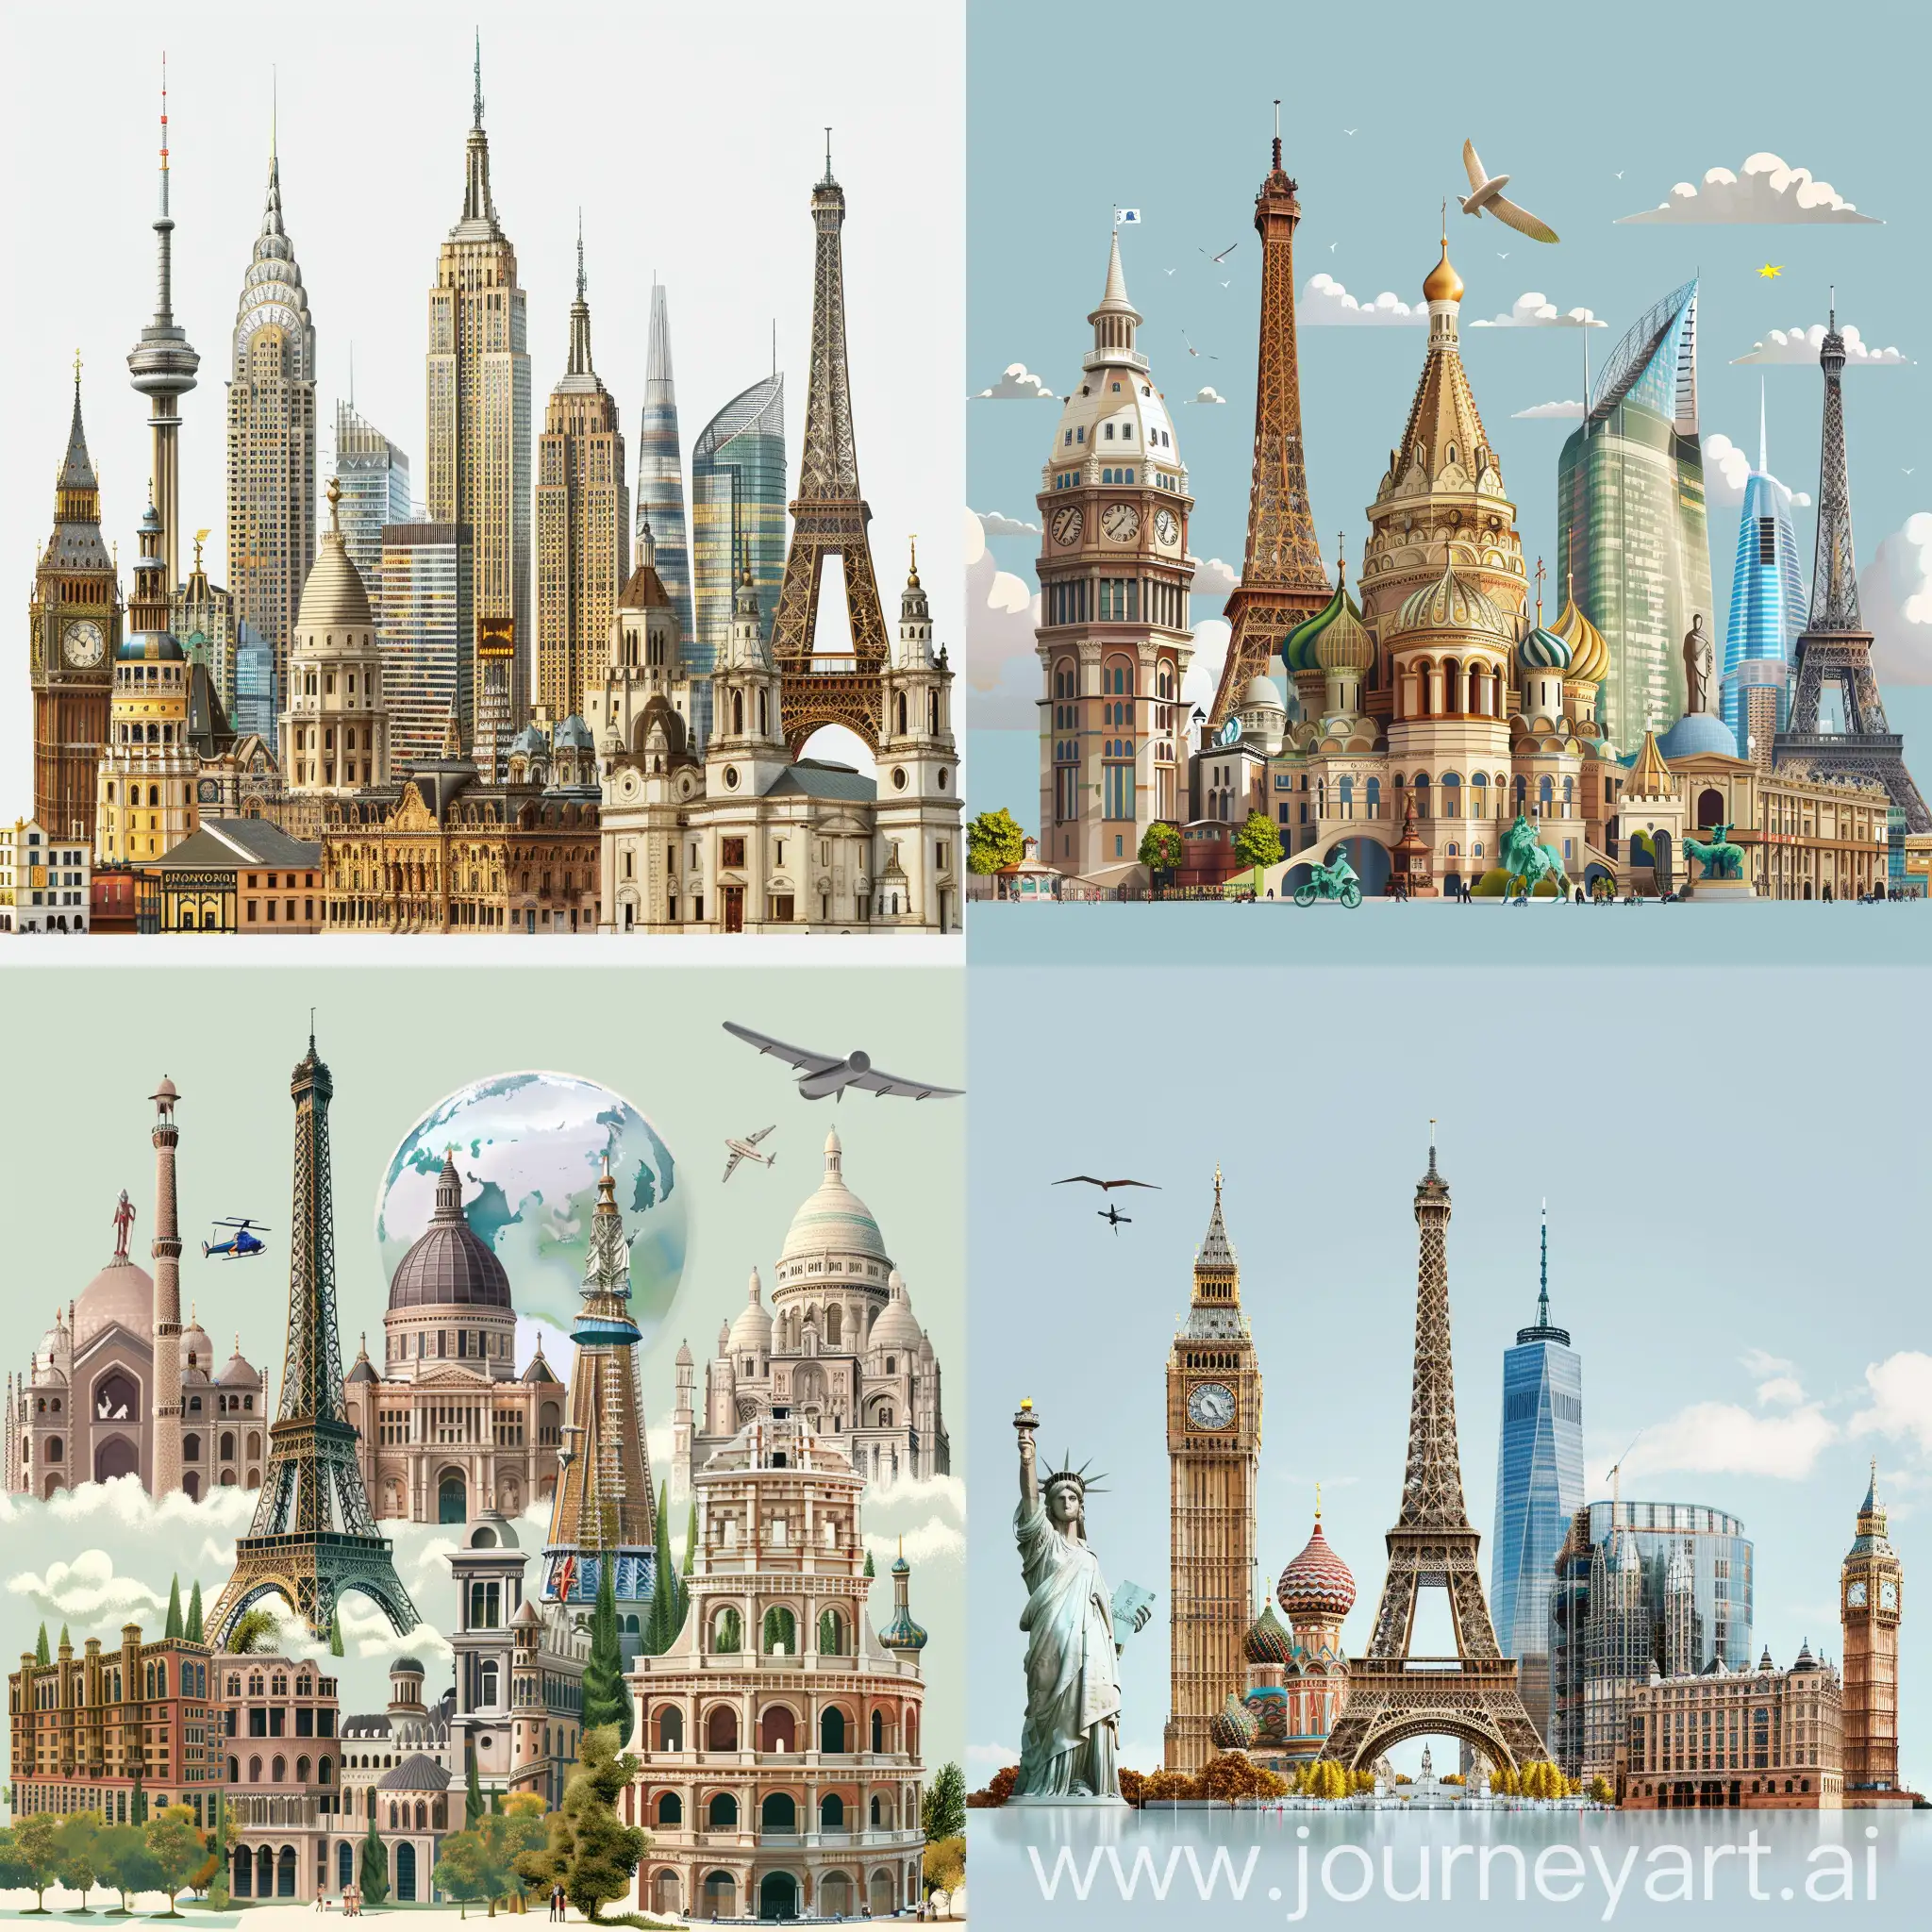  create an image in realistic style with all FAMOUST buildings IN THE WORLD